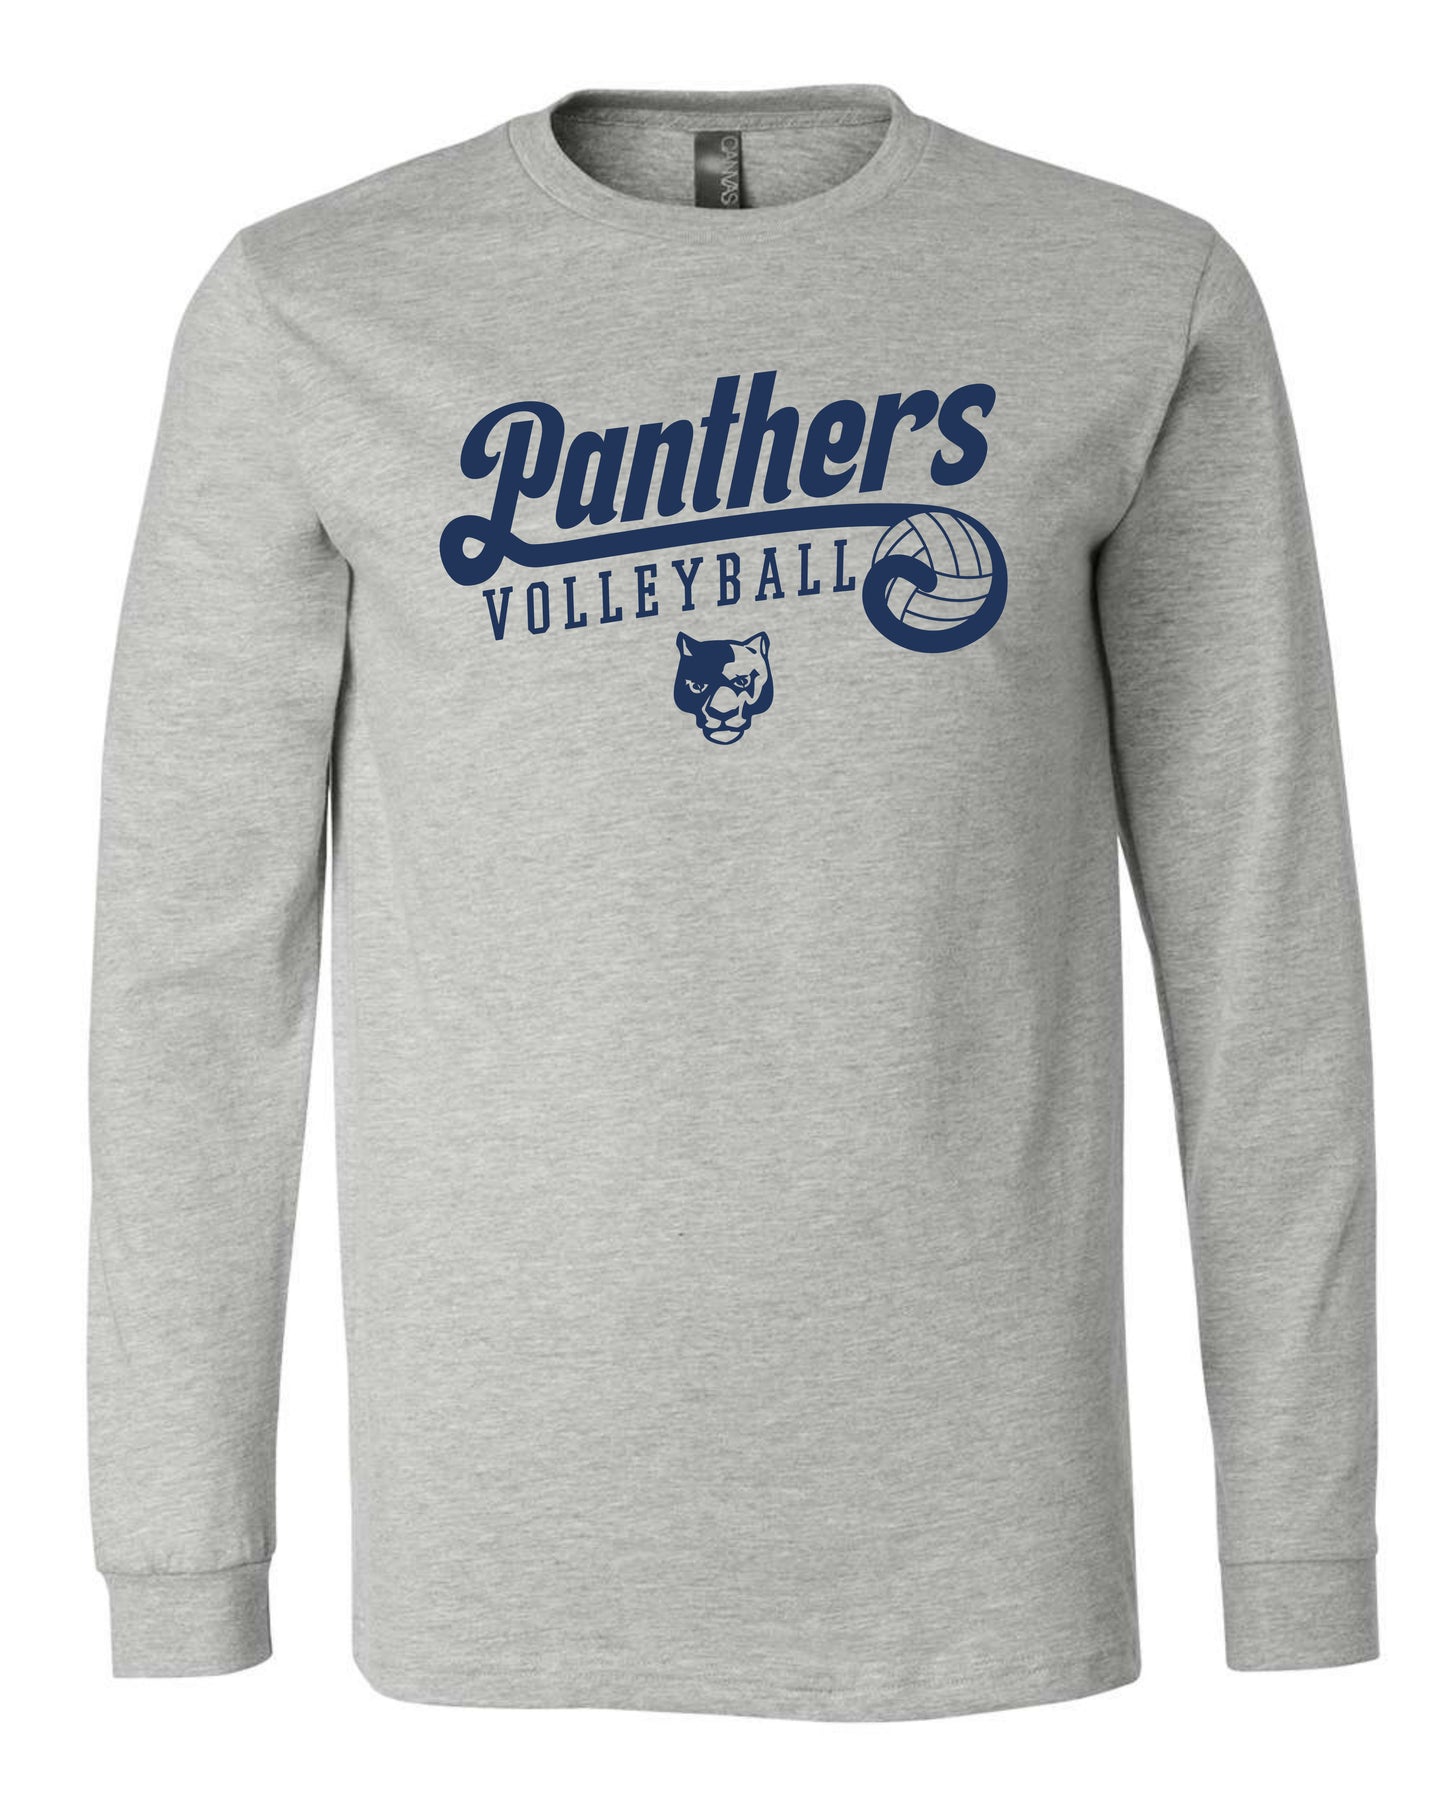 Panthers Volleyball Retro- Adult Long Sleeve